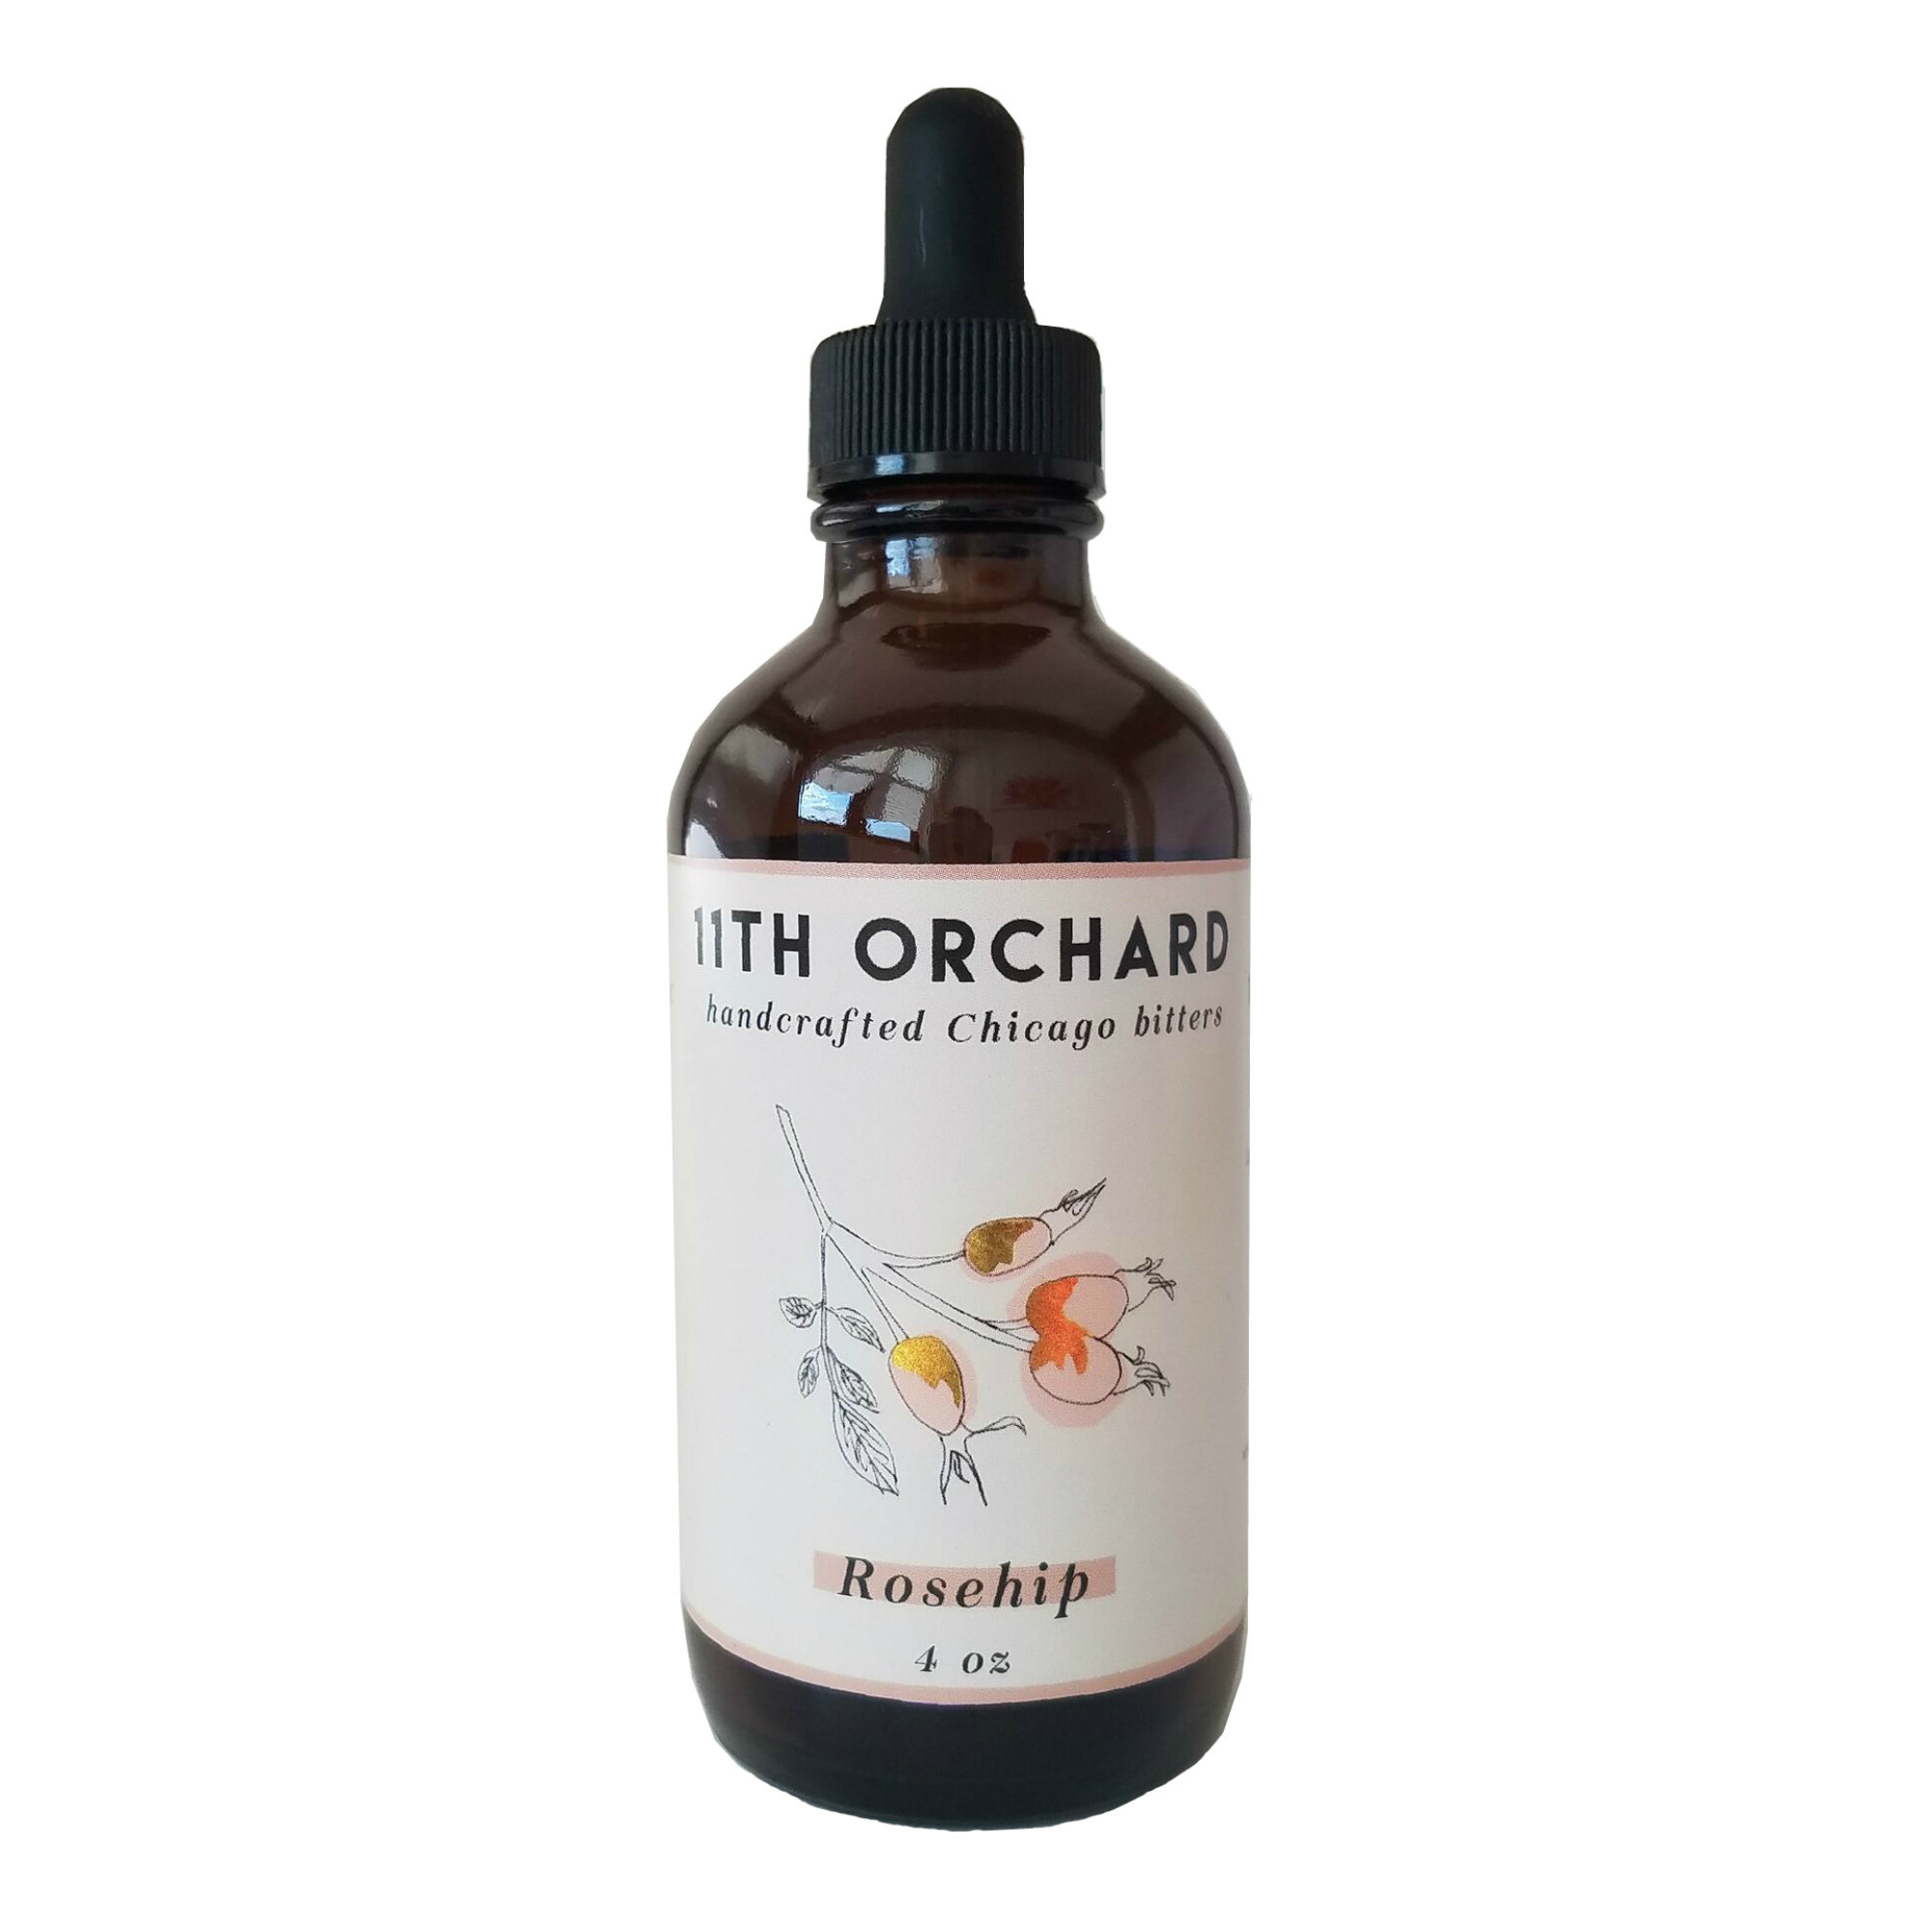 11th Orchard Bitters “Rosehip” Bitters 4oz